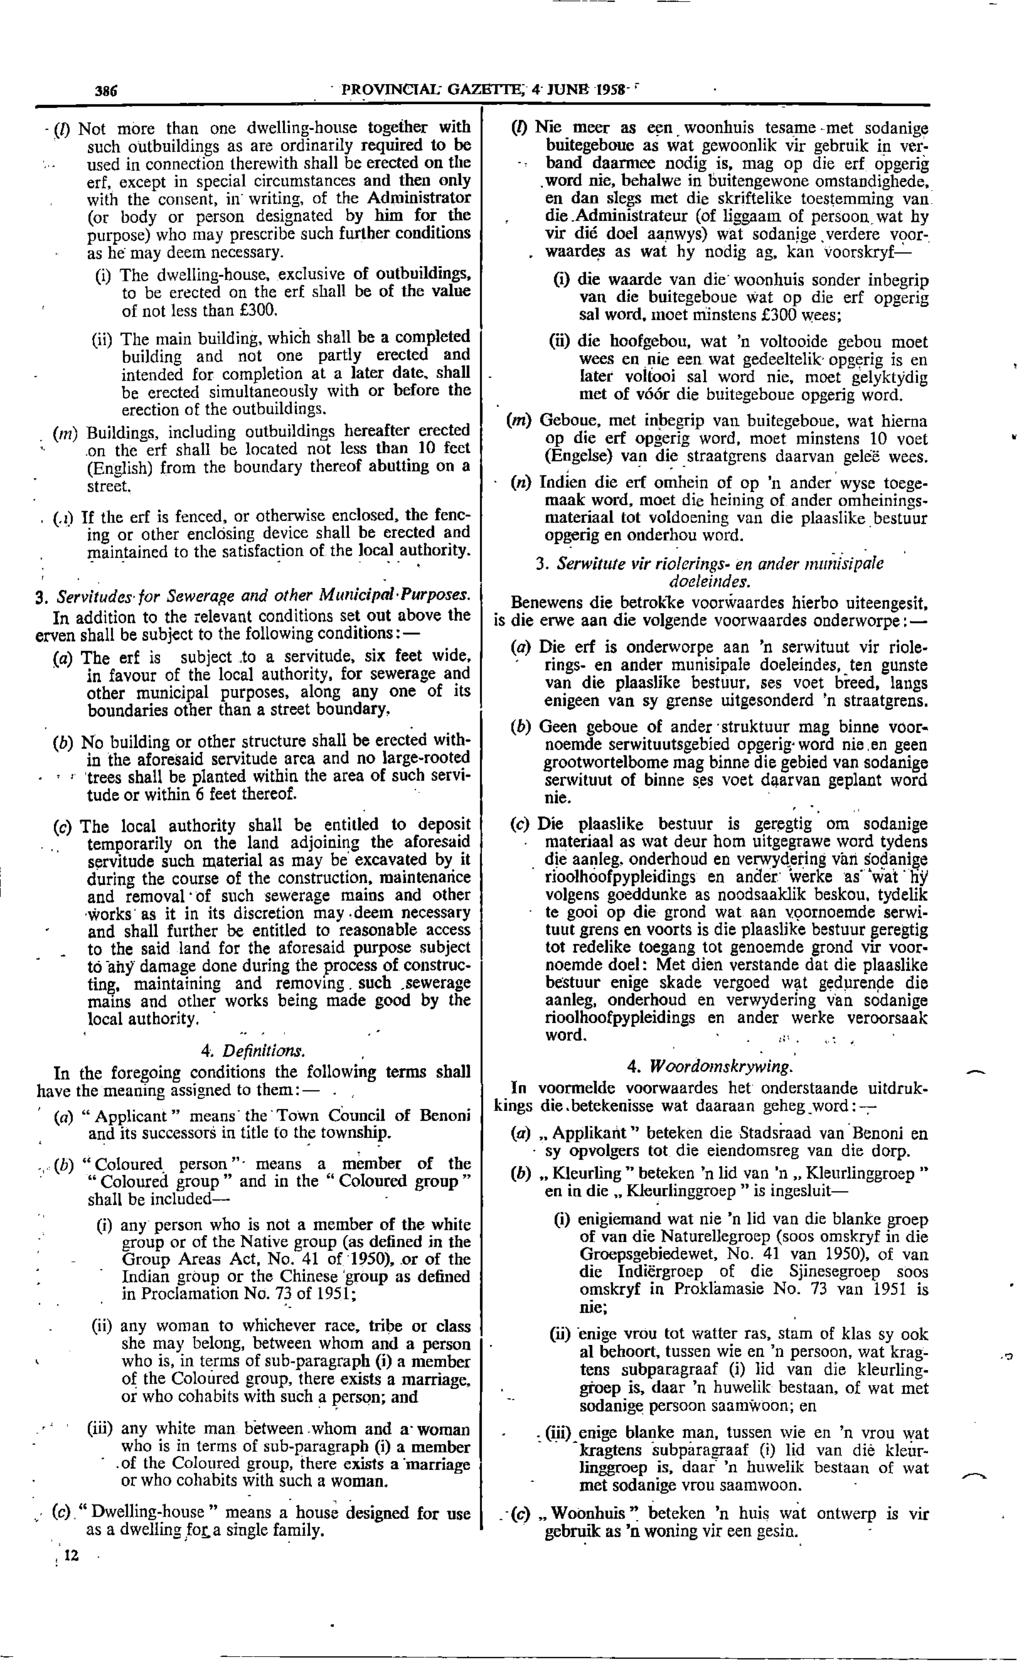 1 and _ 386 PROVINCIAL GAZETTE; 4 JUNE 1958 (1) Not more than one dwelling house together with (0 Nie meer as een woonhuis tesame met sodanige such outbuildings as are ordinarily required to be